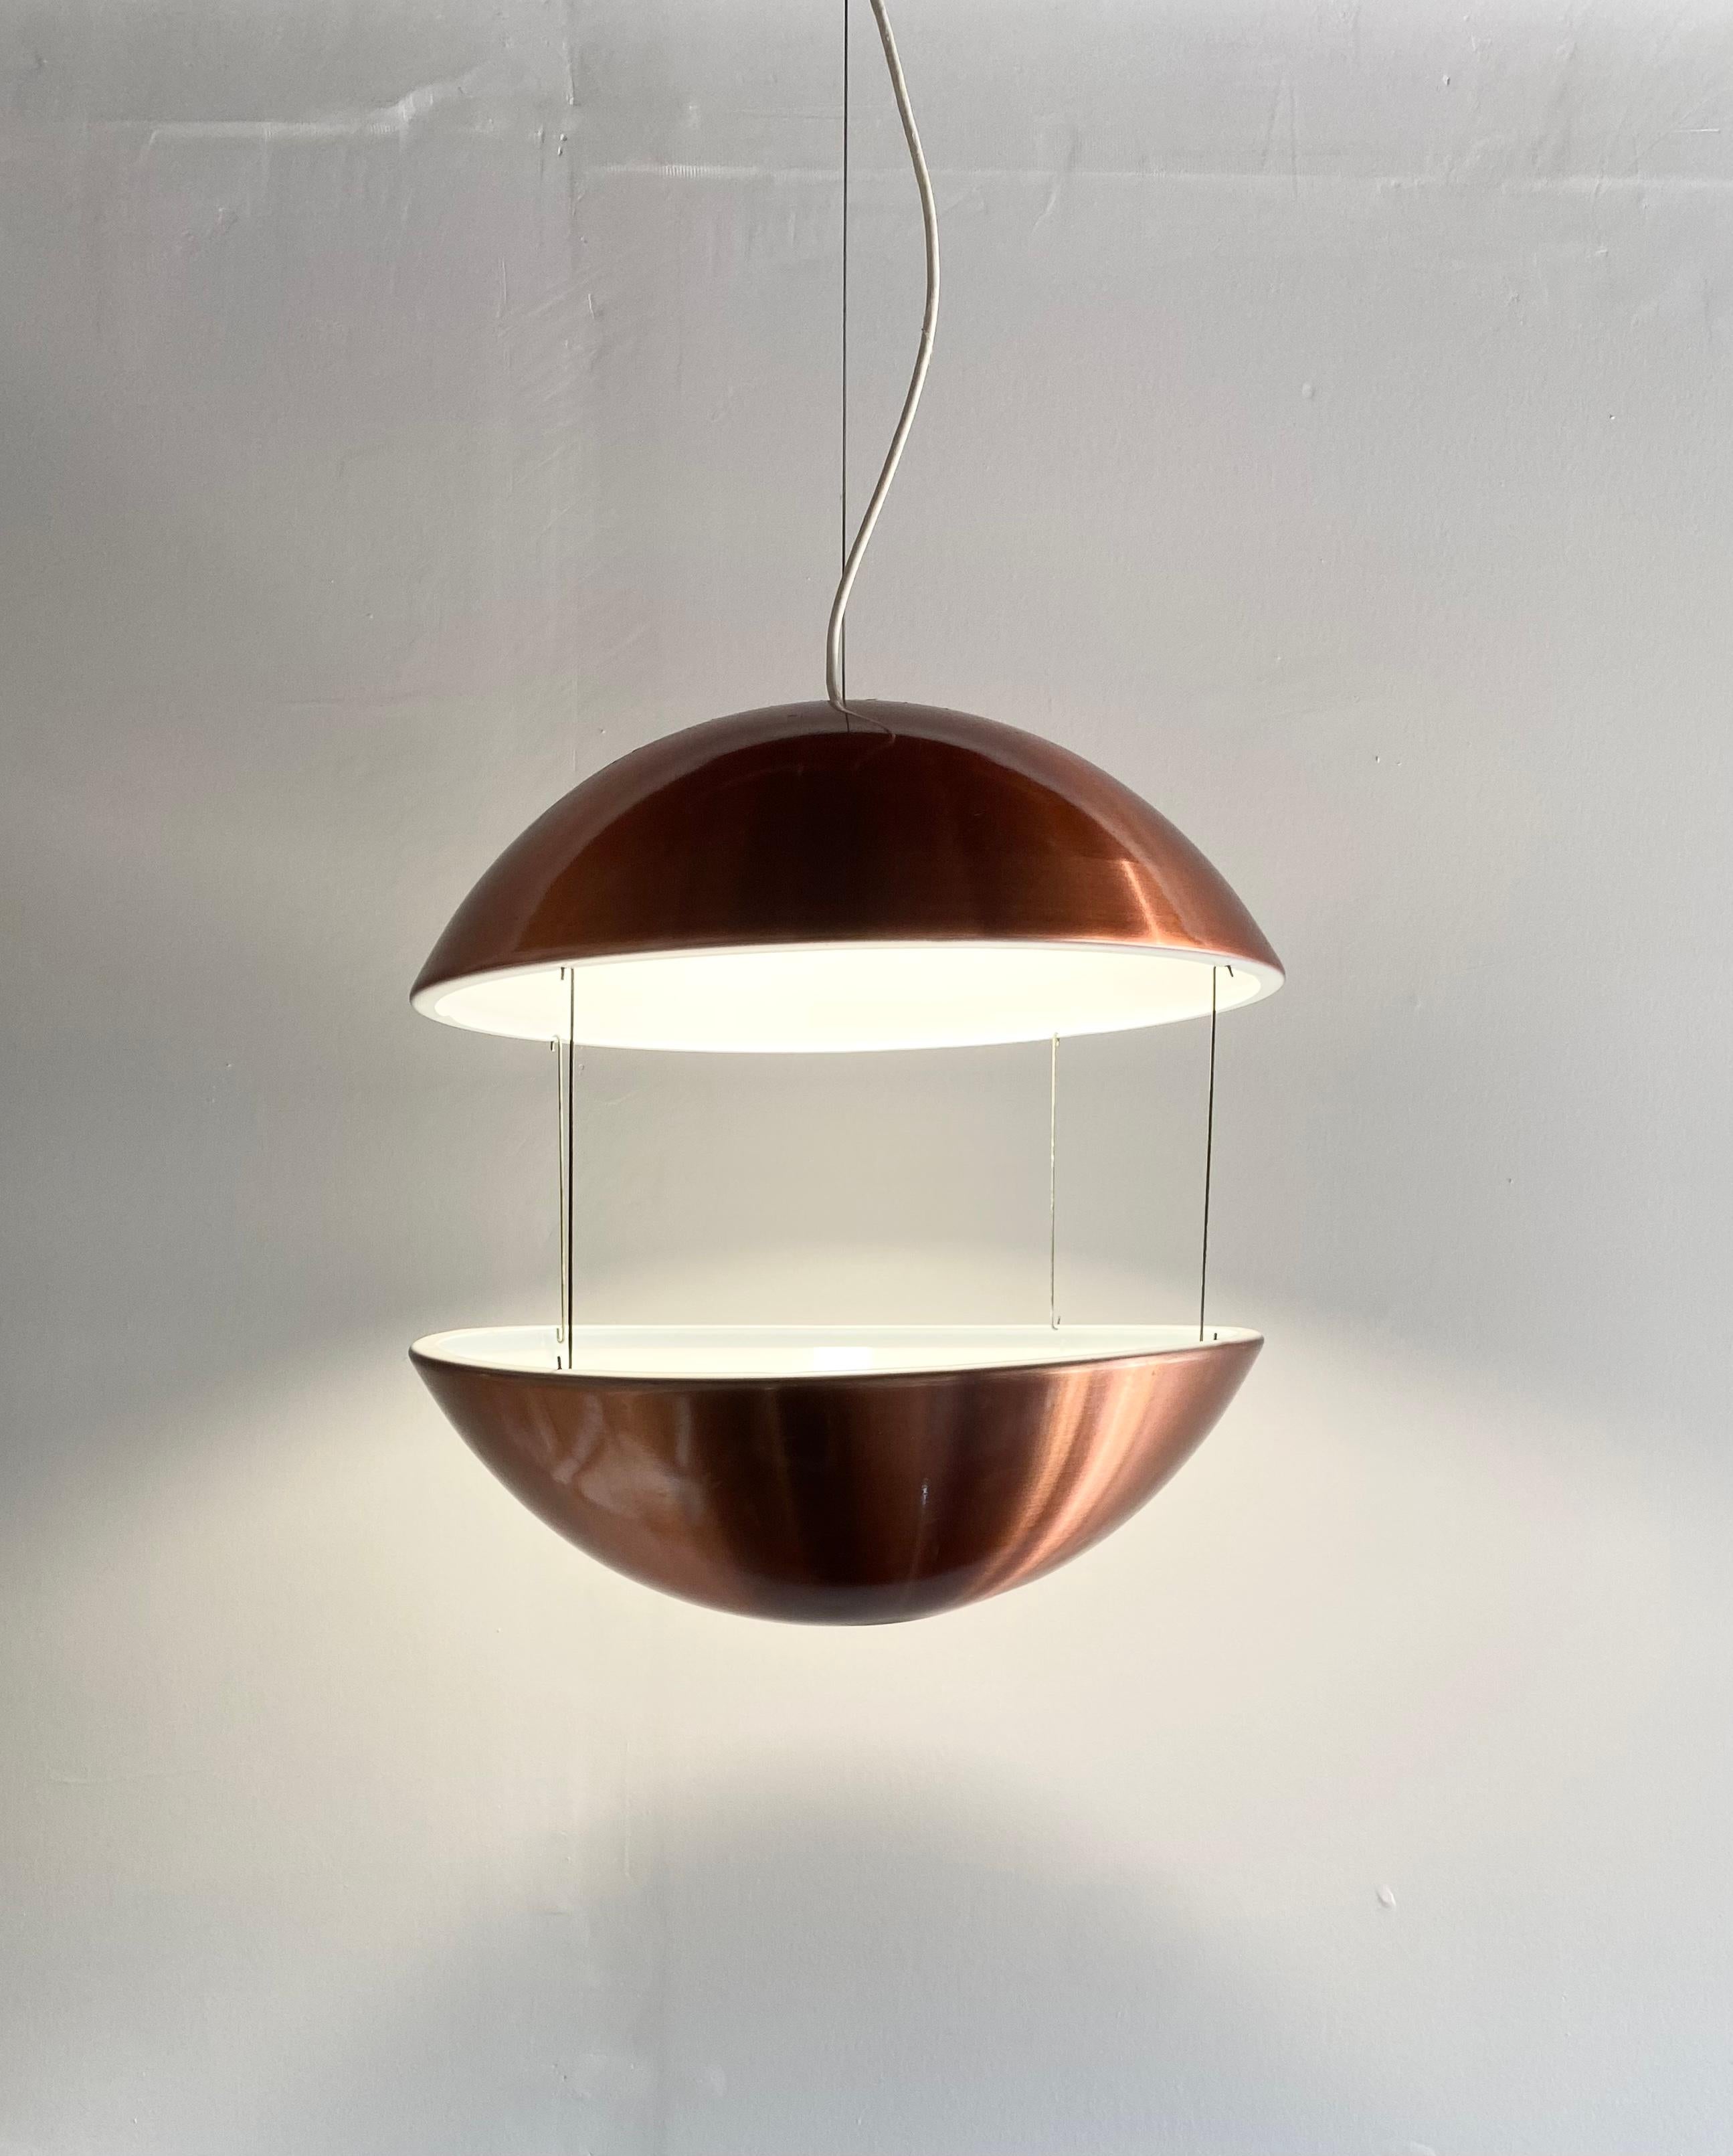 Flower lamp RS 50 designed by Poul Cadovius in 1968 and produced by LB Lyskaer Belysning, label is intact. Brushed copper finish with white enamel interior. 

Two aluminum half domes connected with four connectors, form a broken up sphere. The